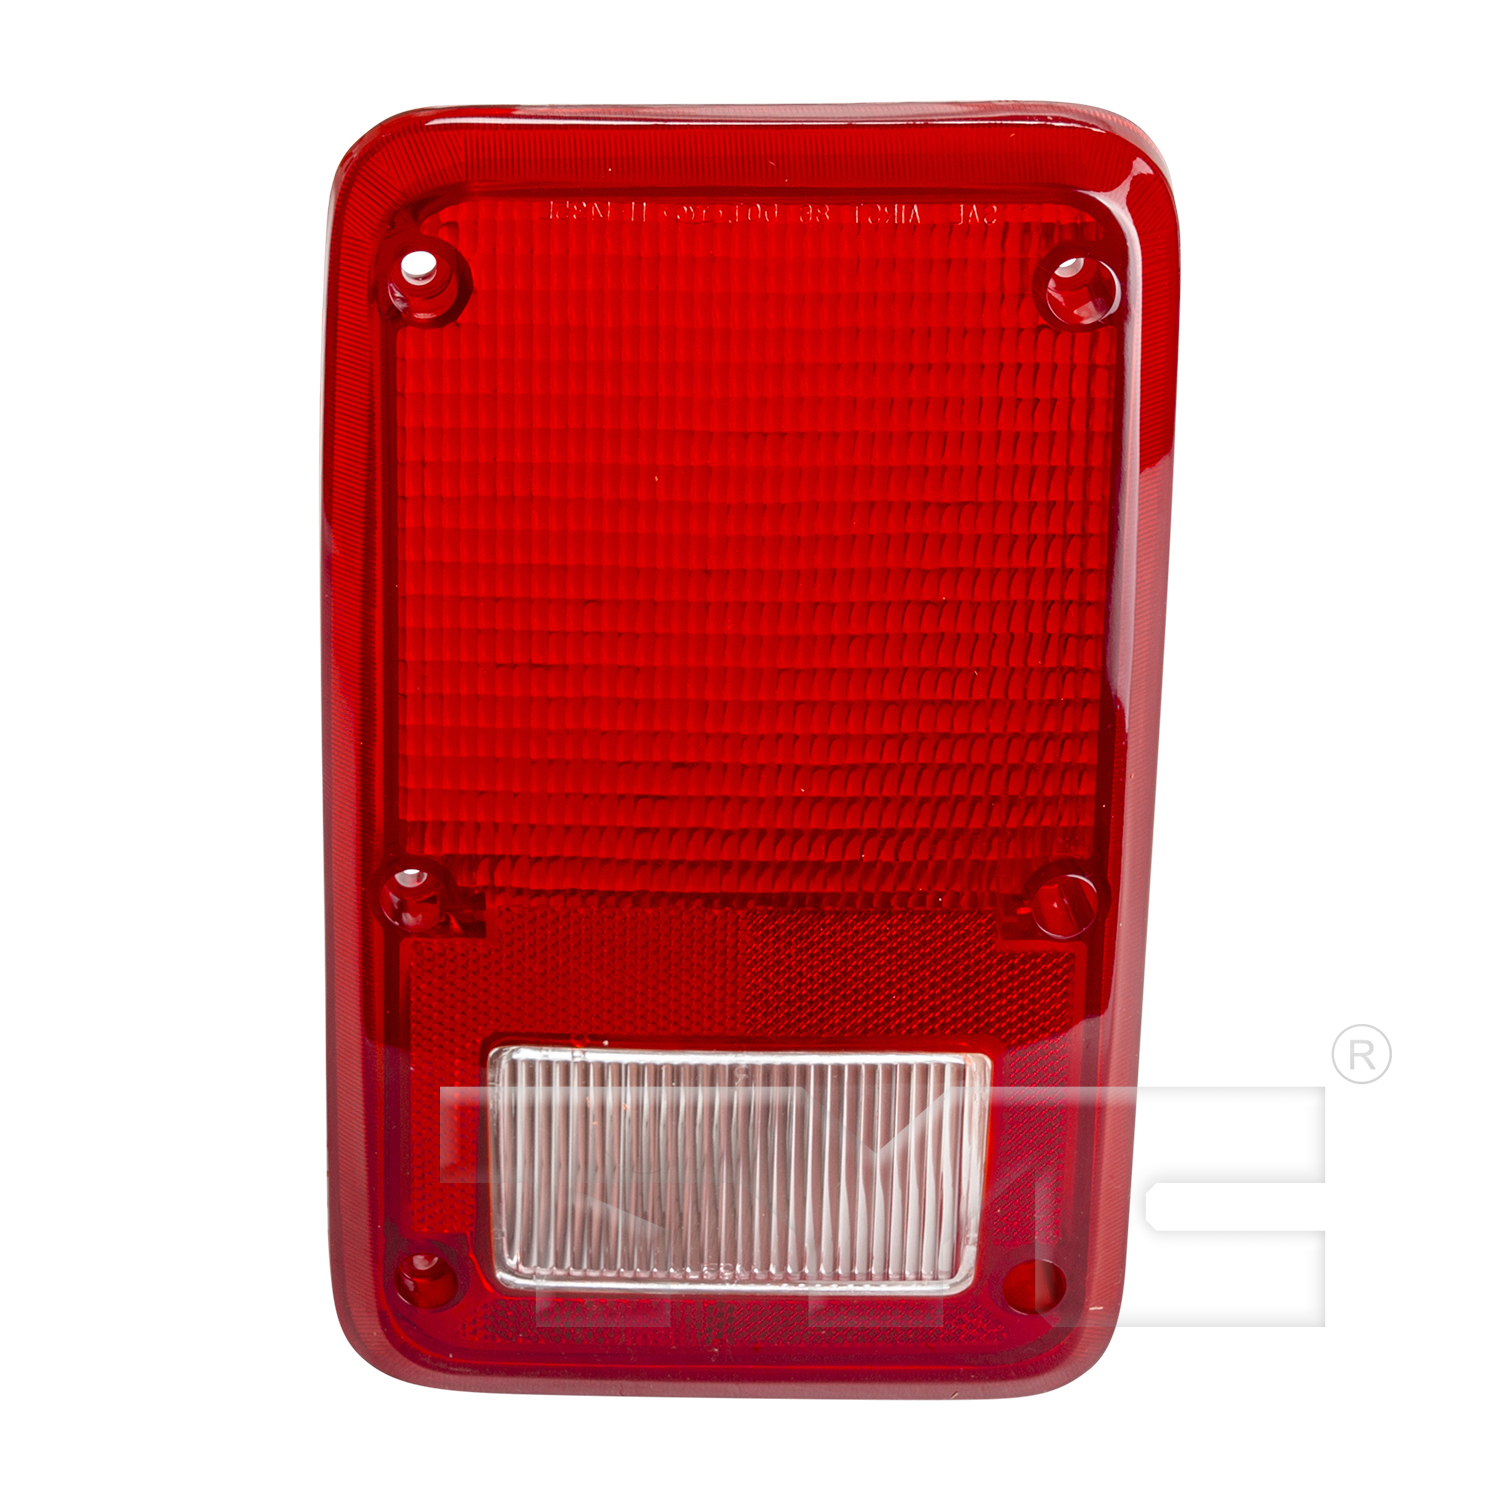 Aftermarket TAILLIGHTS for PLYMOUTH - PB350, PB350,81-83,LT Taillamp lens